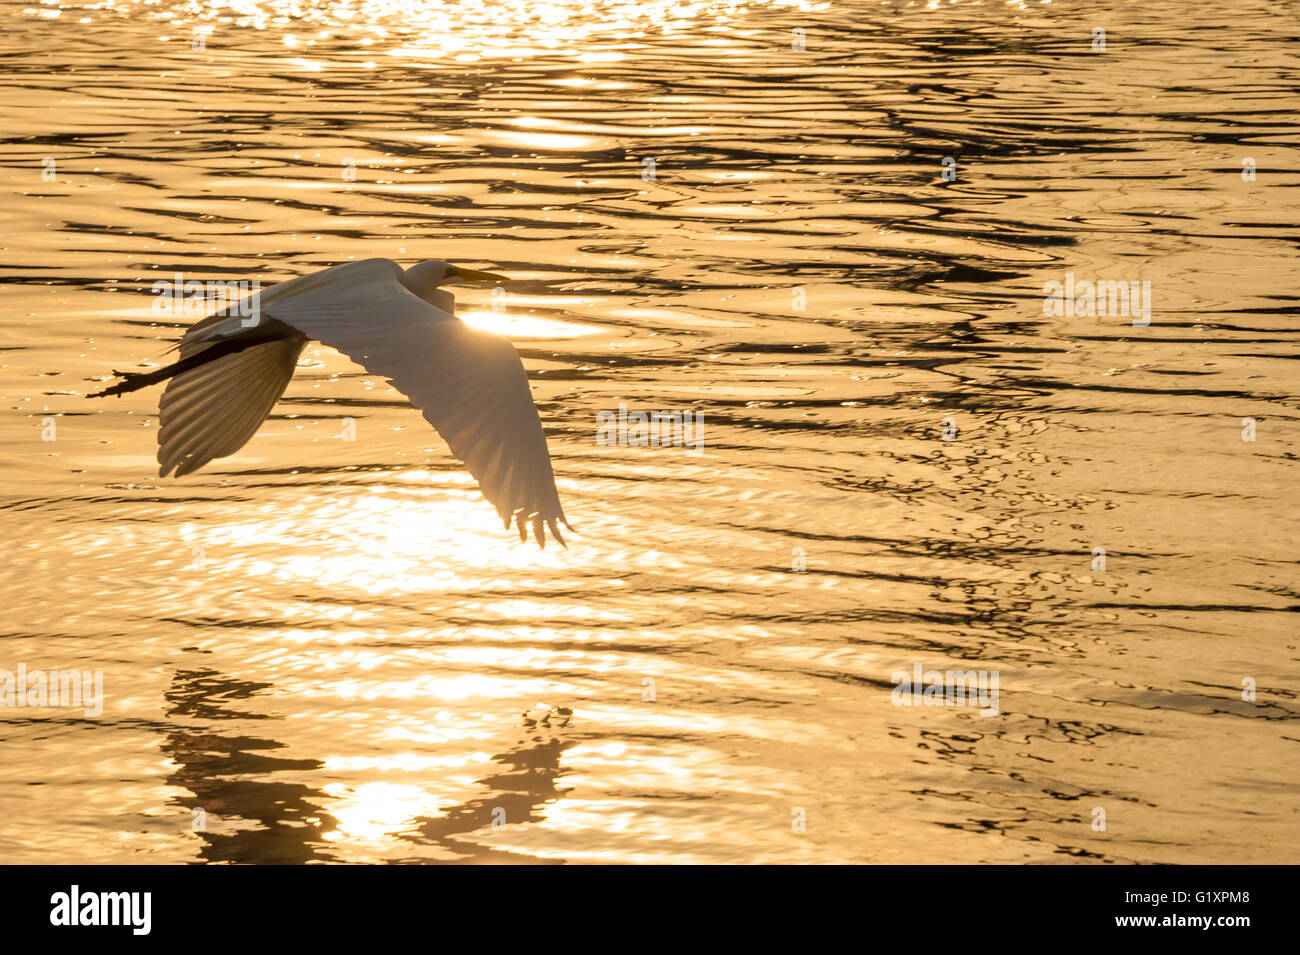 Great egret (great white heron) flying low at sunrise over the liquid gold of Matanzas Bay in St. Augustine, Florida, USA. Stock Photo